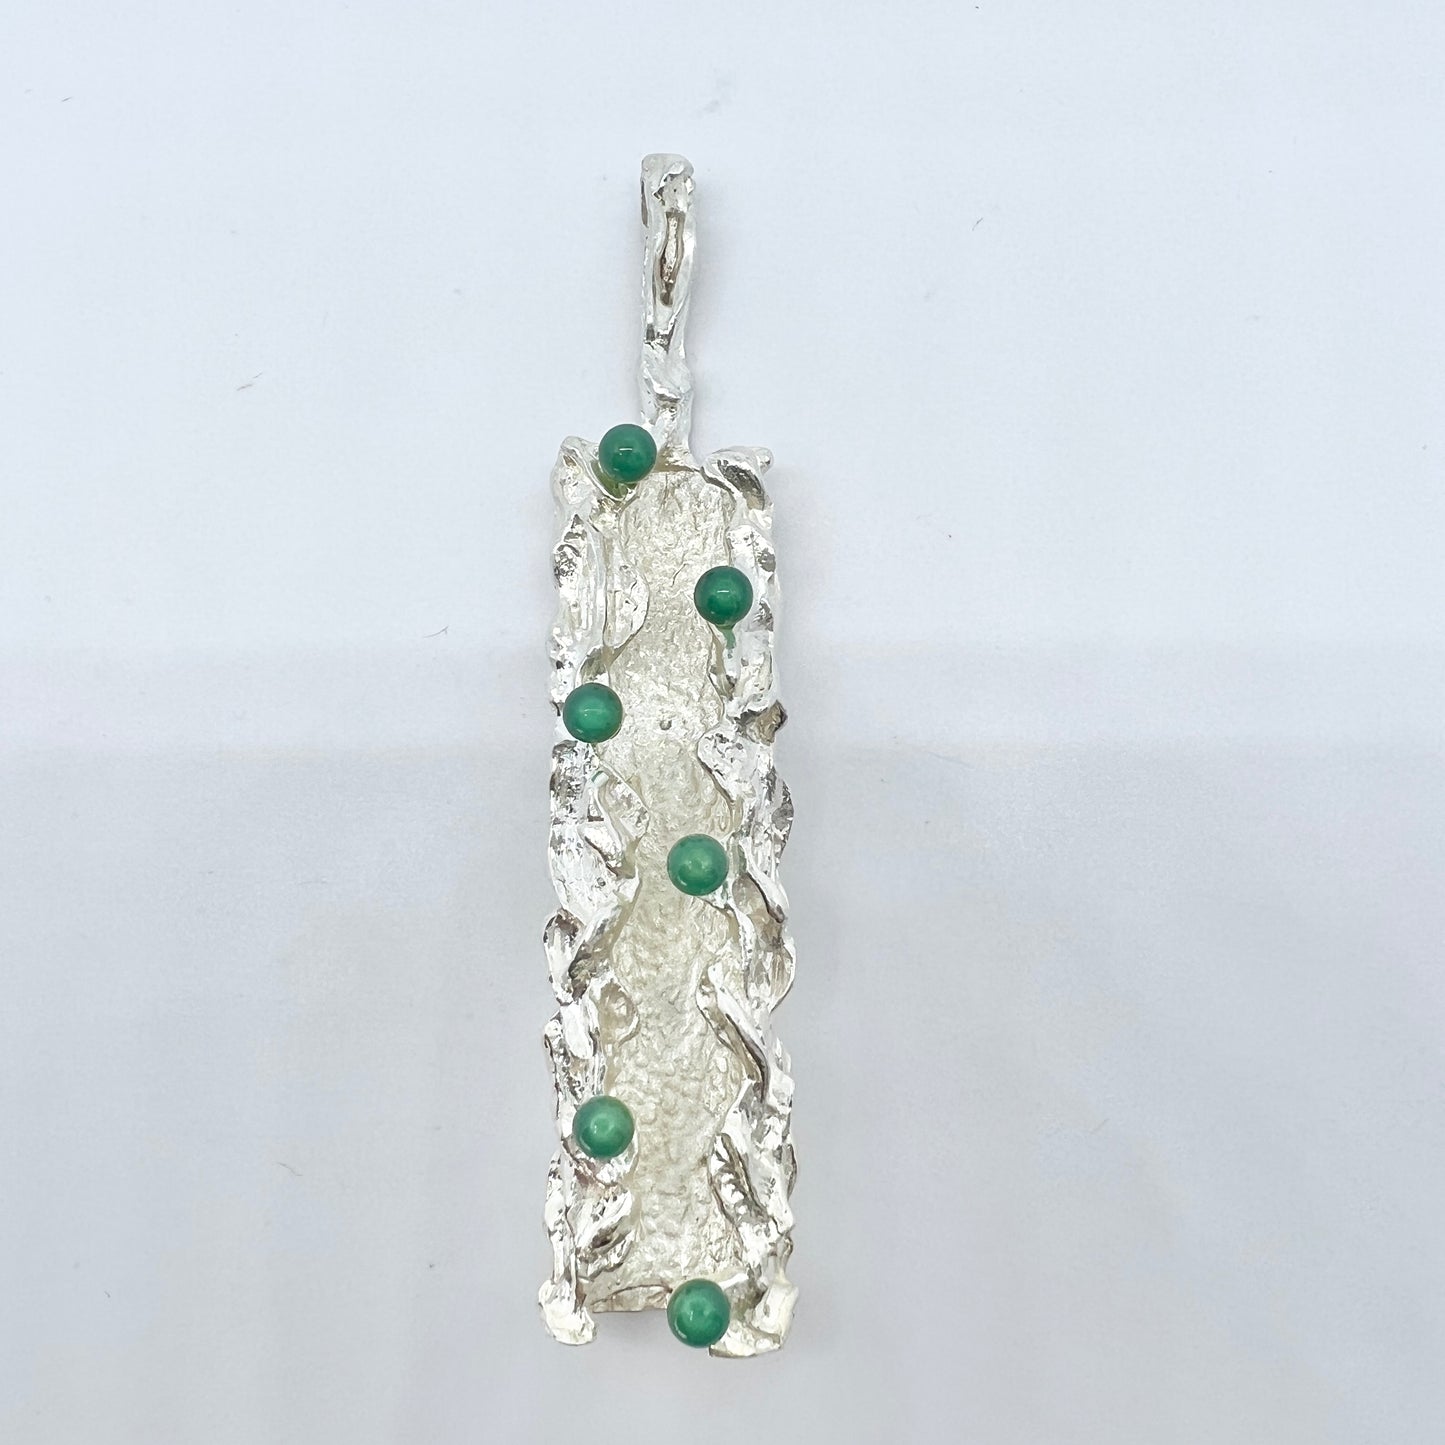 Sweden 1970s. Large Solid Silver Green Glass Pendant.